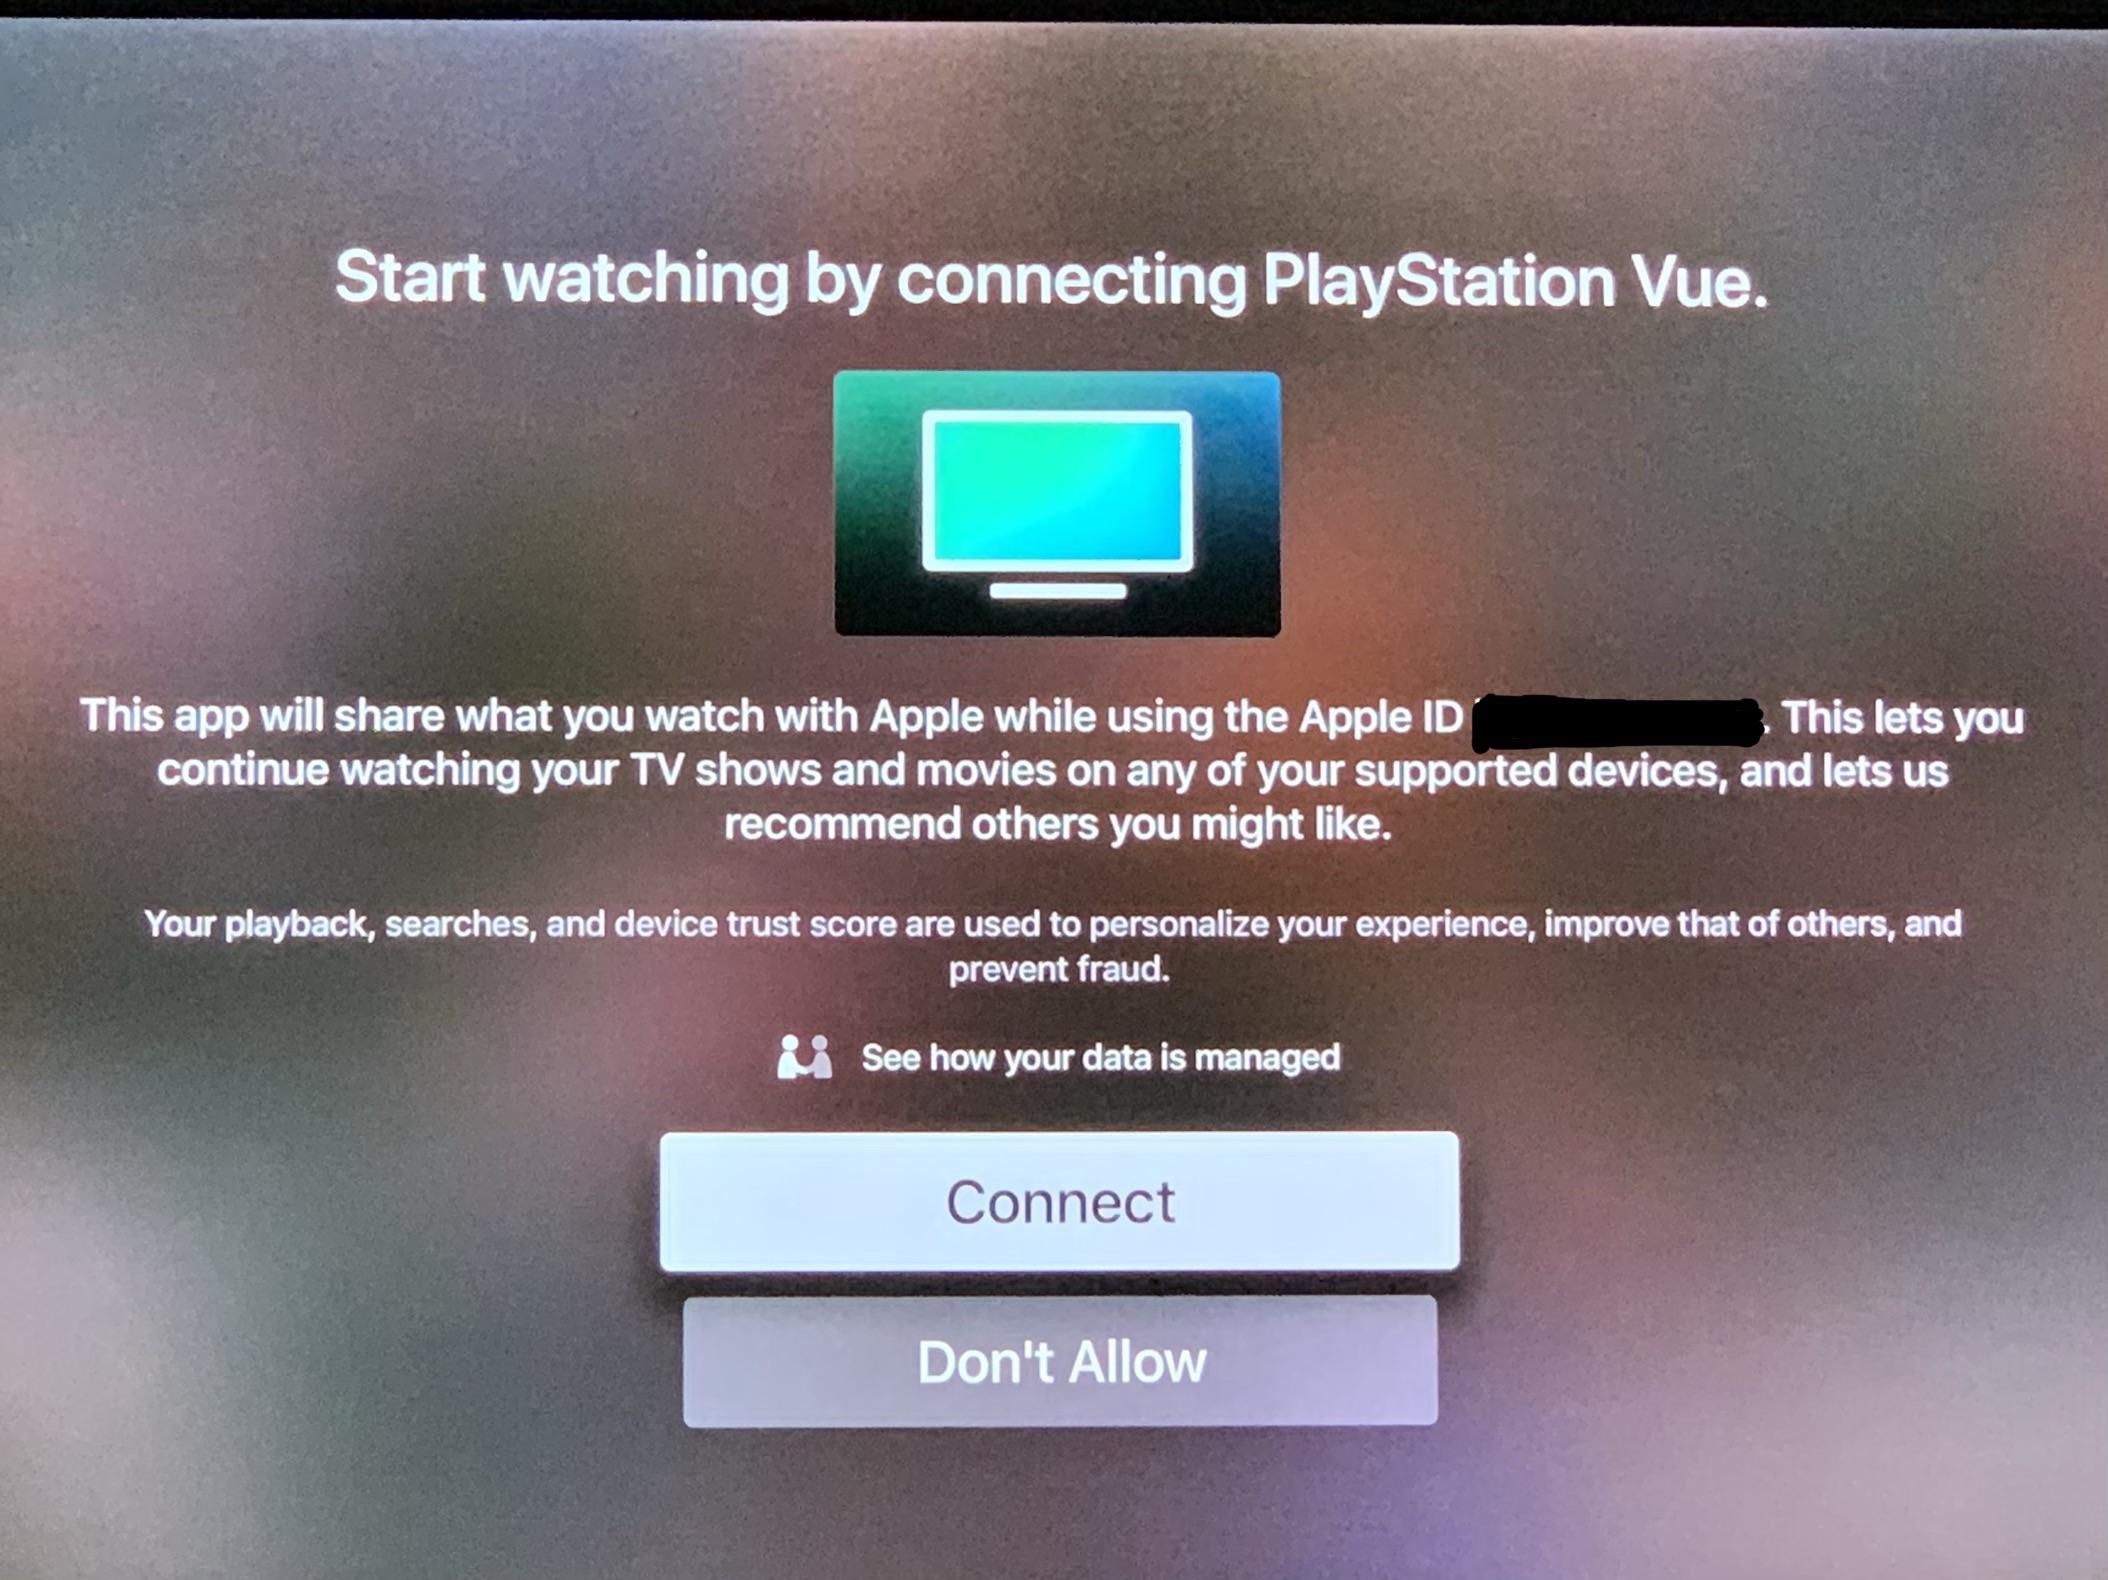 PlayStation Vue is integrated with the Apple TV App